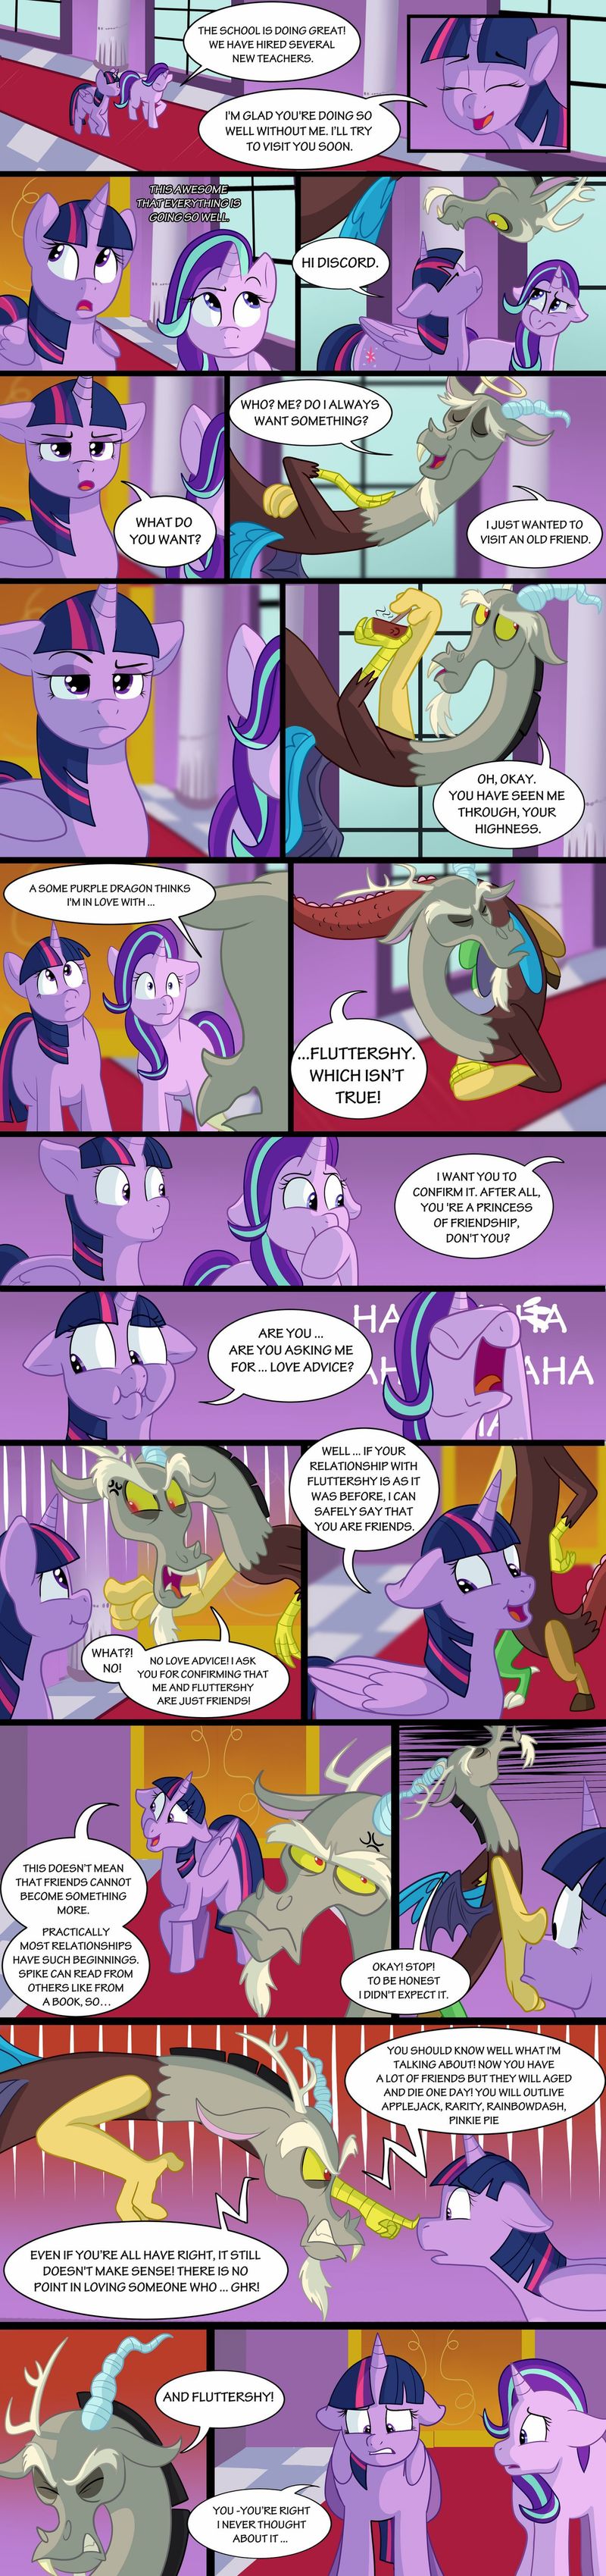 Page 16-18: In Canterlot 1/2